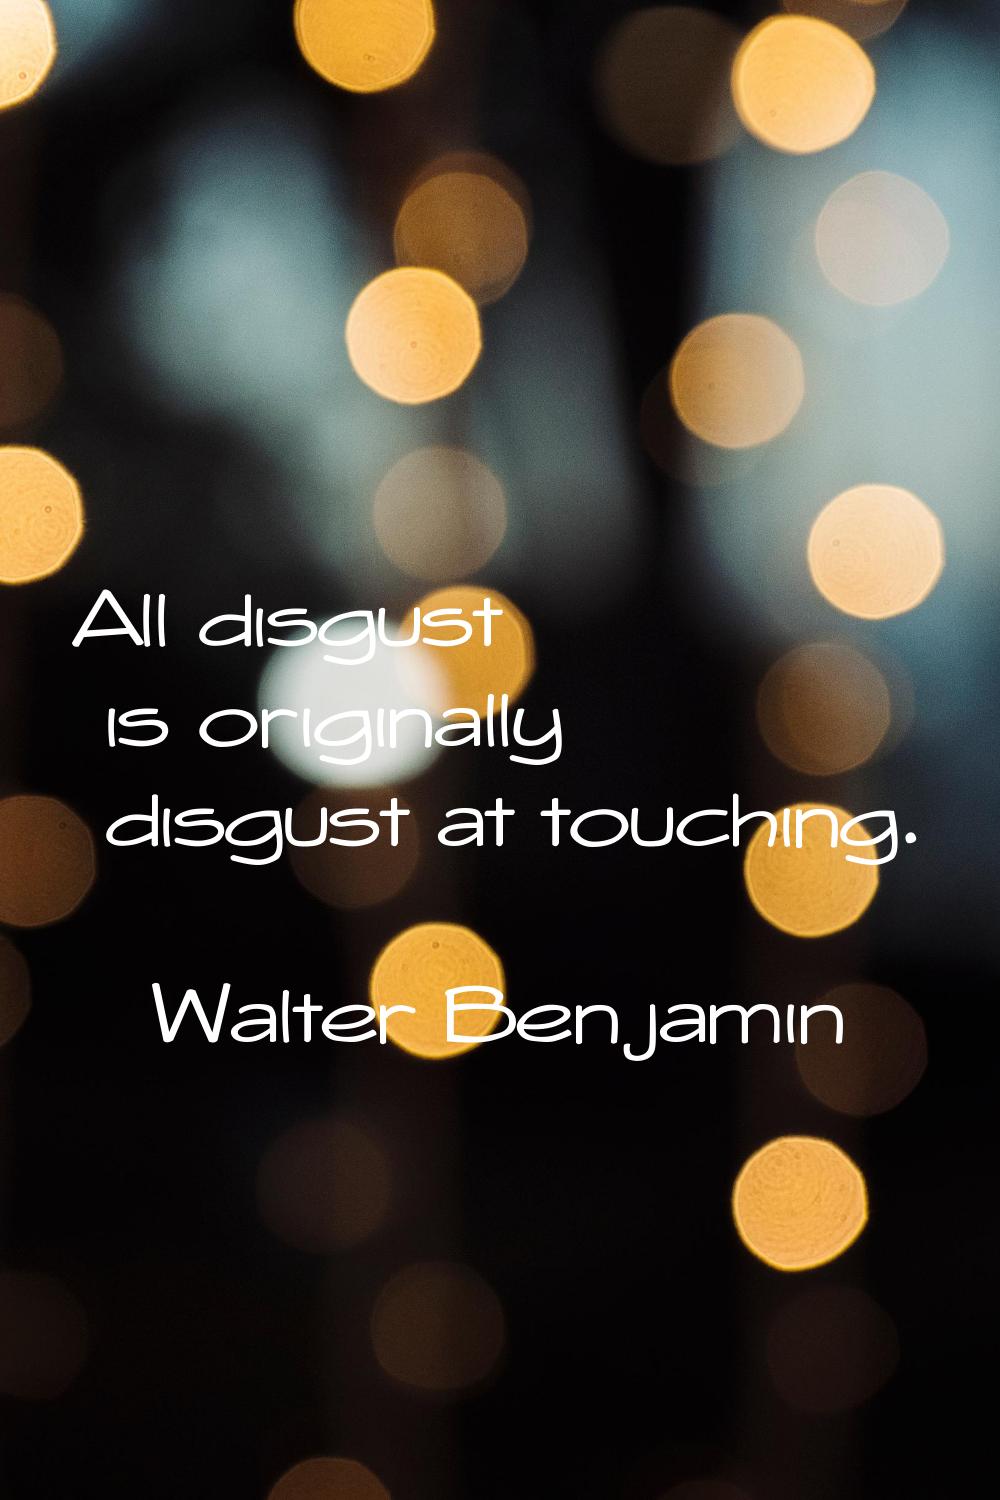 All disgust is originally disgust at touching.